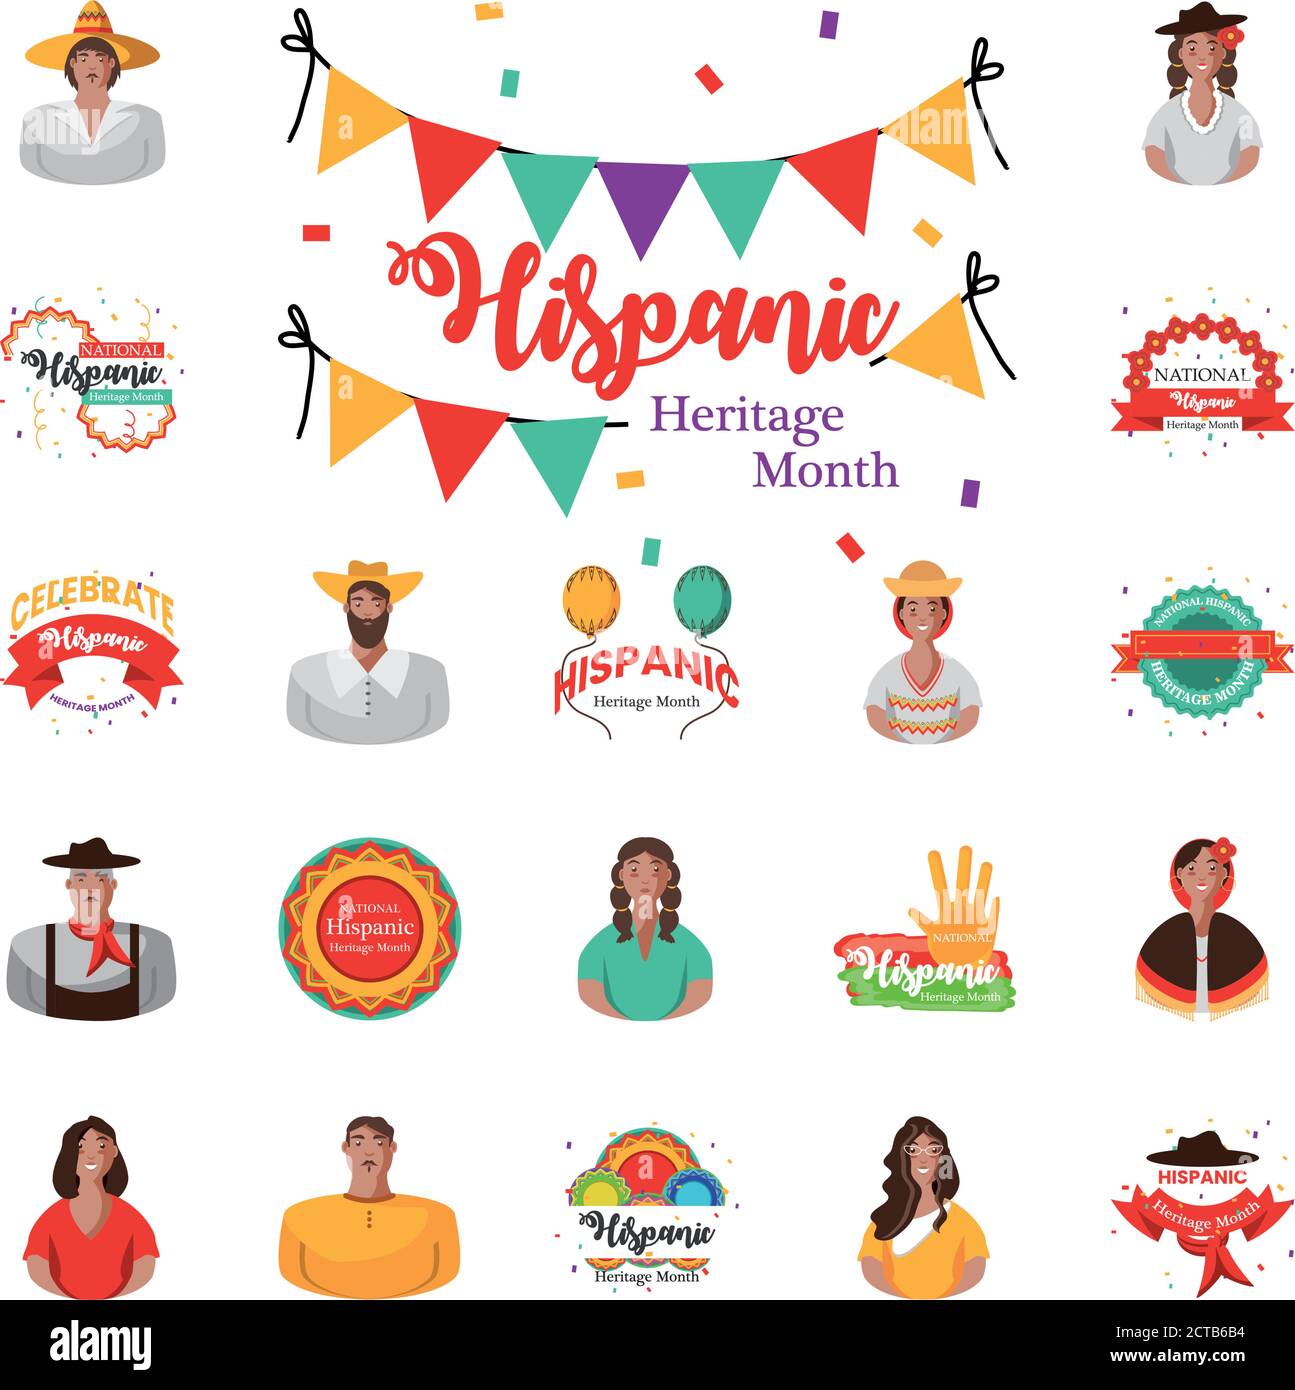 national hispanic heritage month icons group design, culture and latino